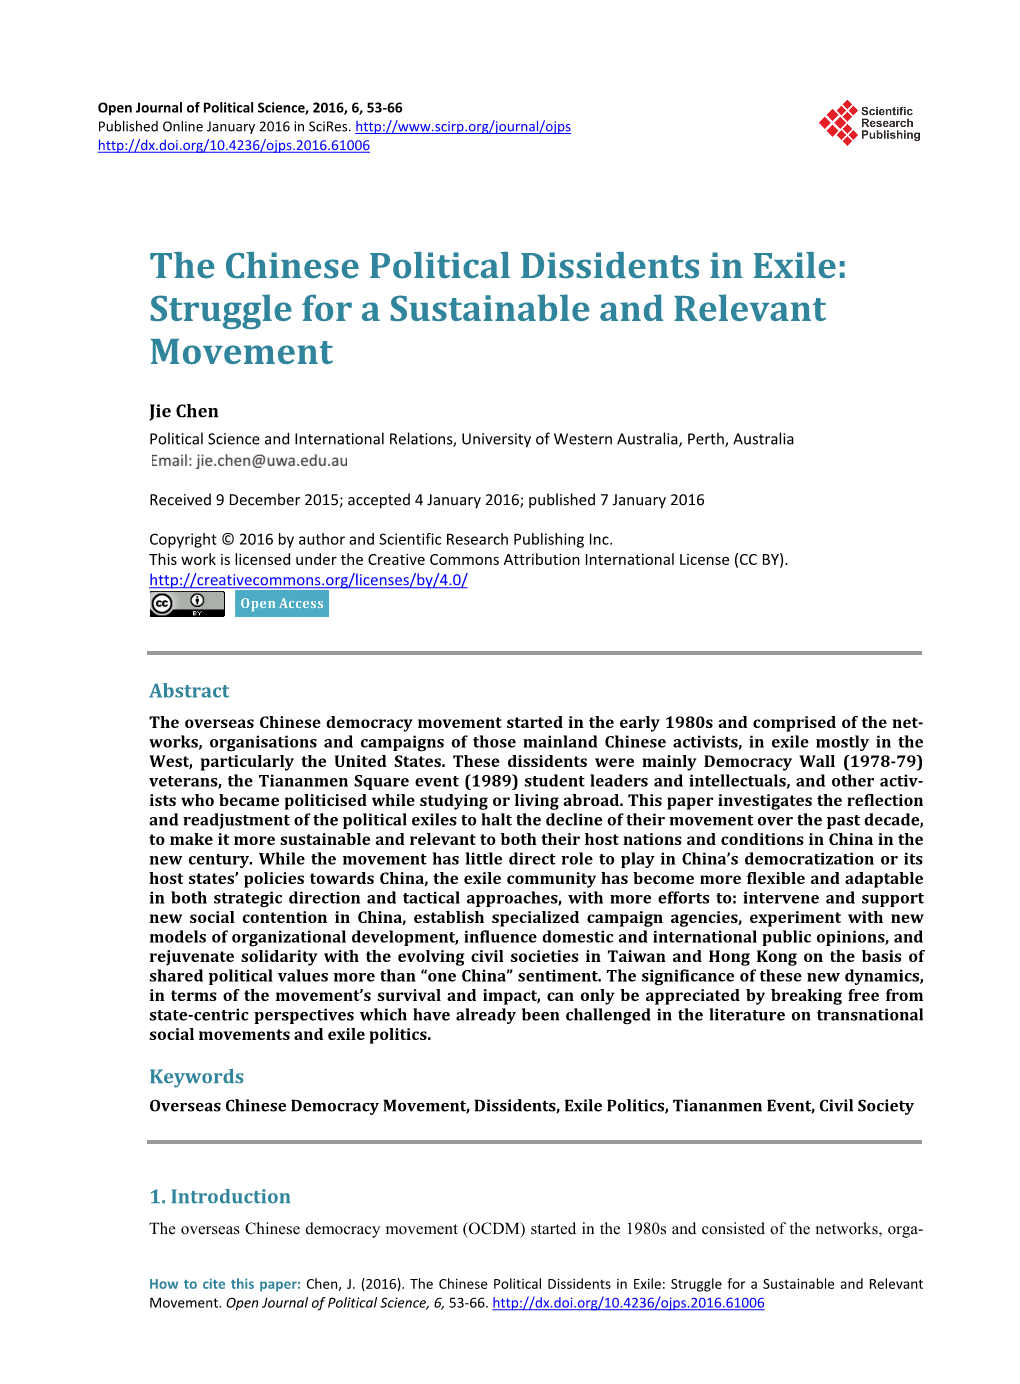 The Chinese Political Dissidents in Exile: Struggle for a Sustainable and Relevant Movement